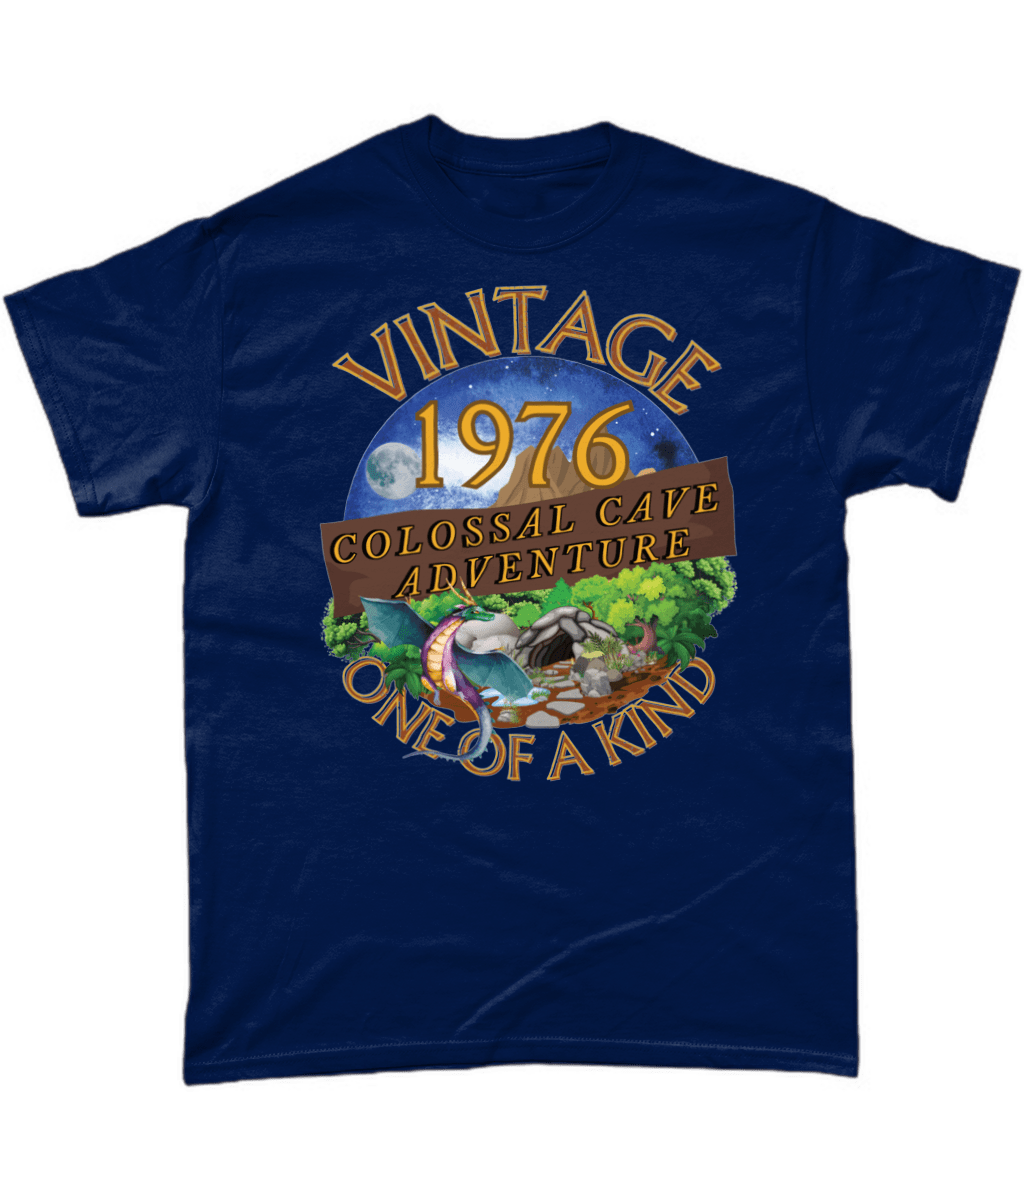 Navy T-Shirt with words vintage,1976,colossal cave adventure,one of a kind,circular picture of a dragon,cave and woodland,night sky